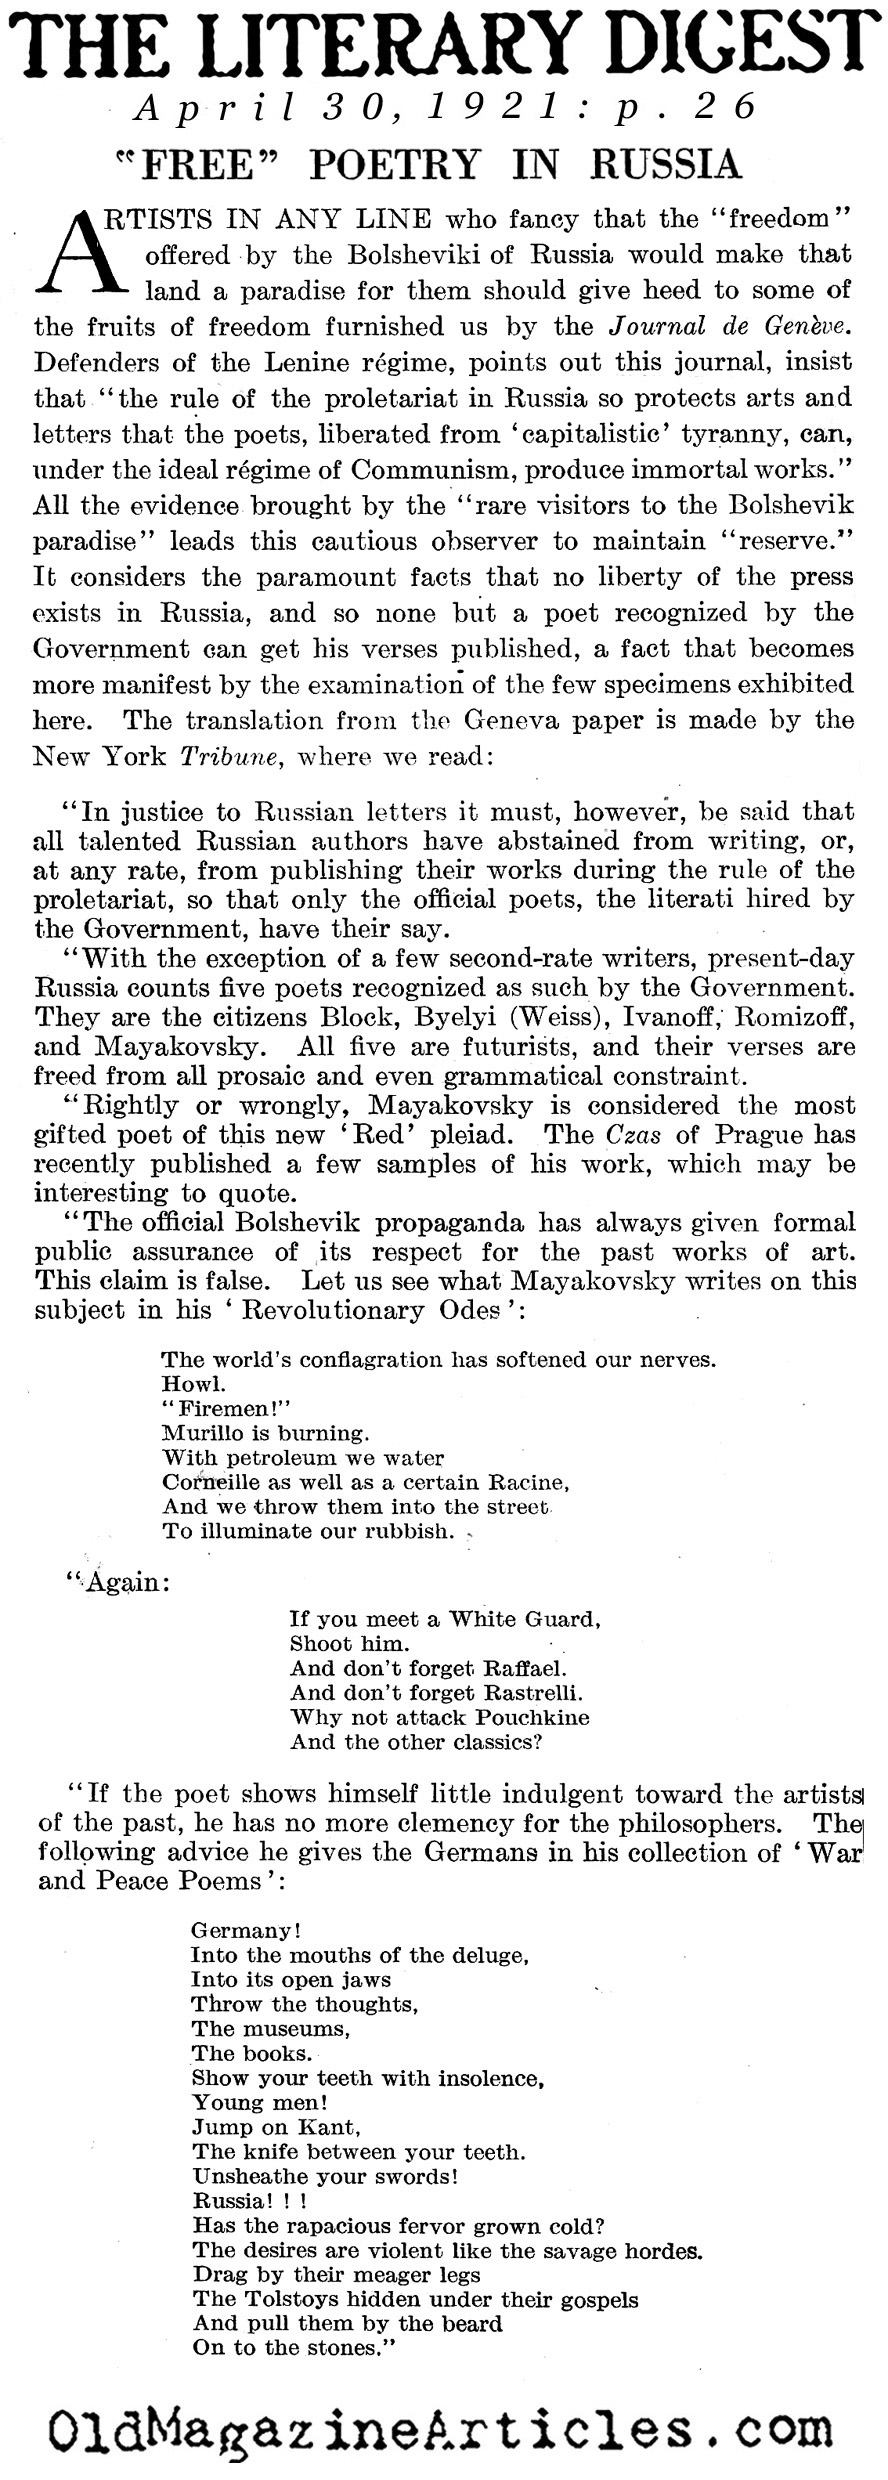 Soviet-Approved Poetry (Literary Digest, 1921)